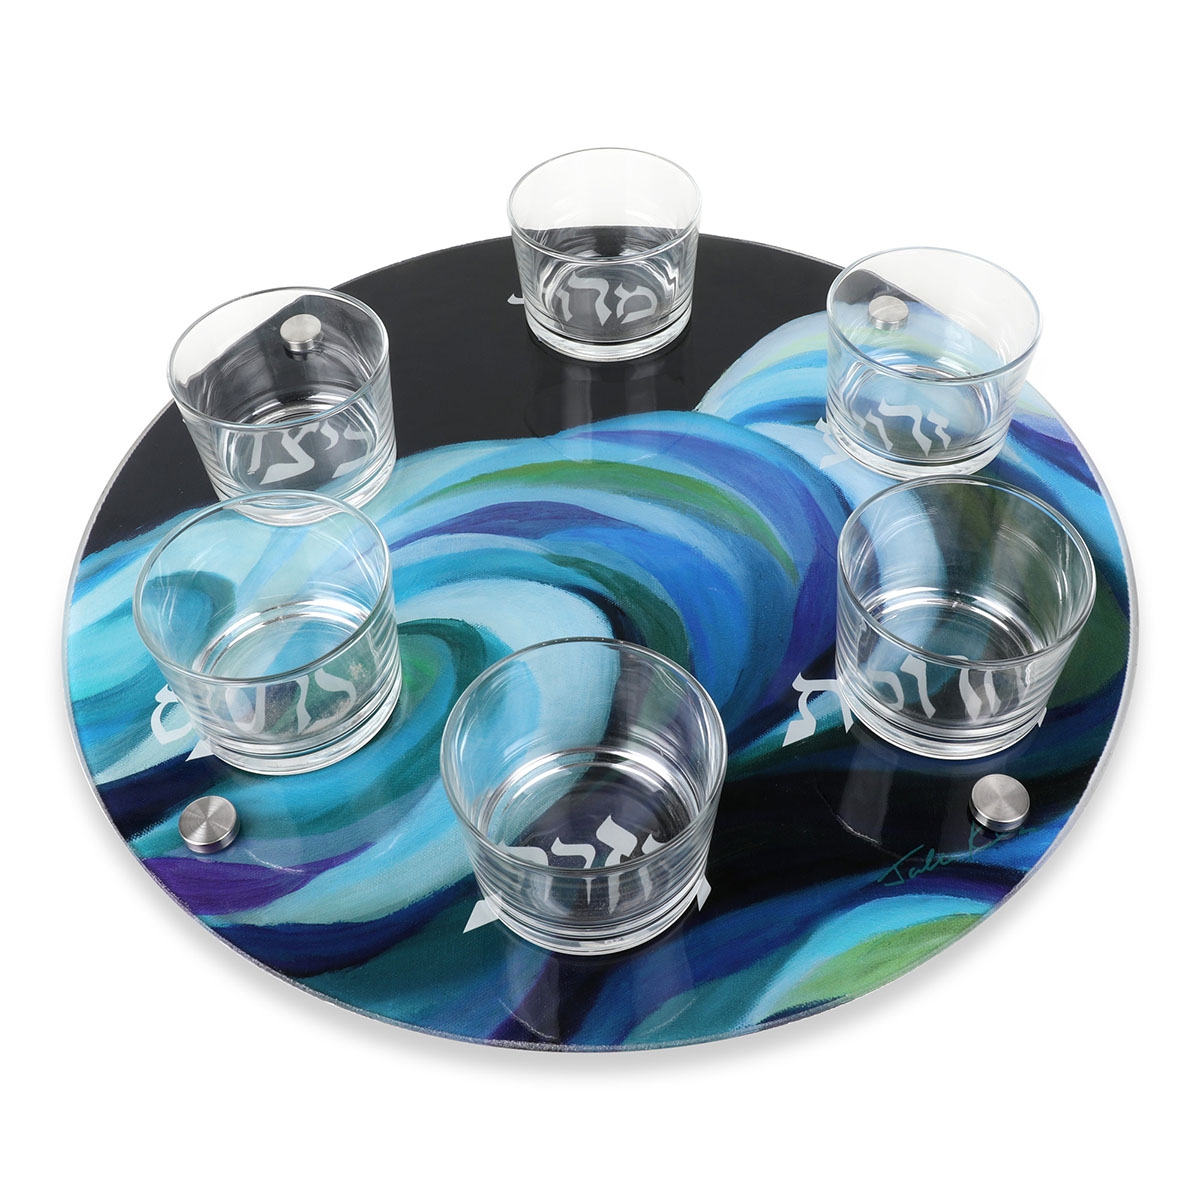 Glass Seder Plate With Splitting of the Sea Design By Jordana Klein - 1